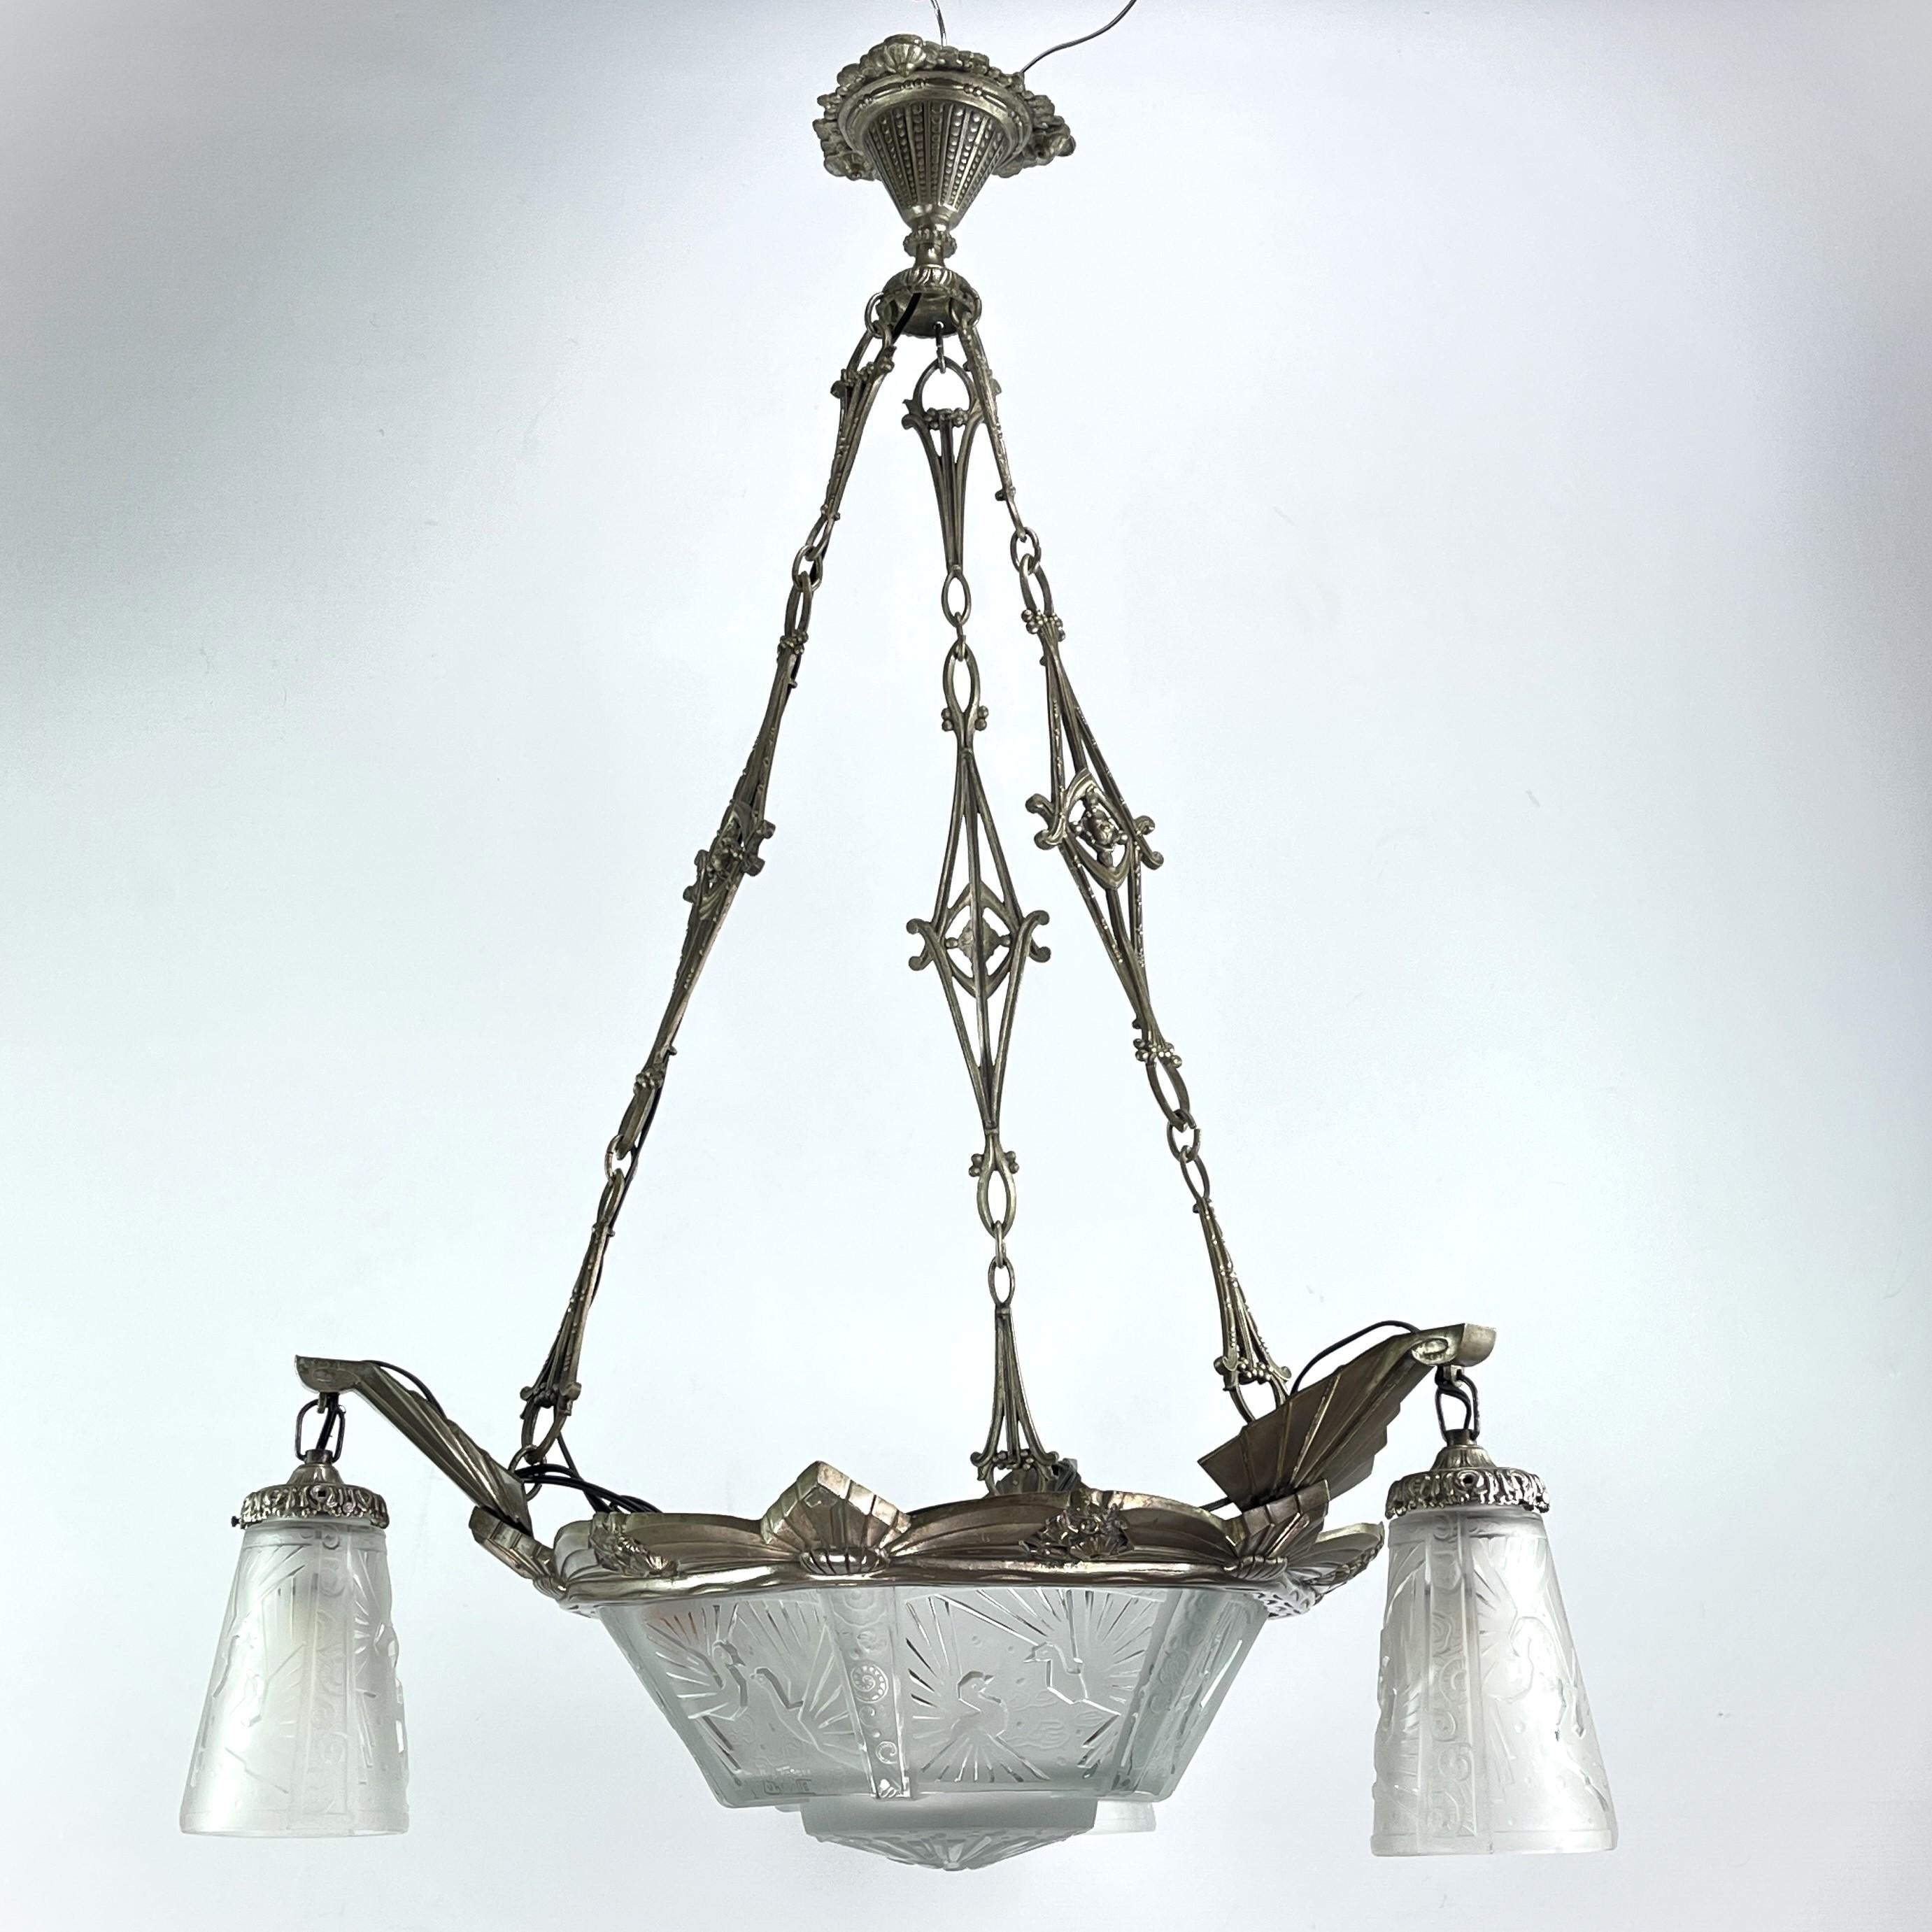 Art Deco chandeliers by Atelier Petitot & Muller Freres Luneville

This stunning Art Deco chandelier from the 1930s is an outstanding example of the elegance and sophistication of the Art Deco style. With its combination of nickel-plated bronze and